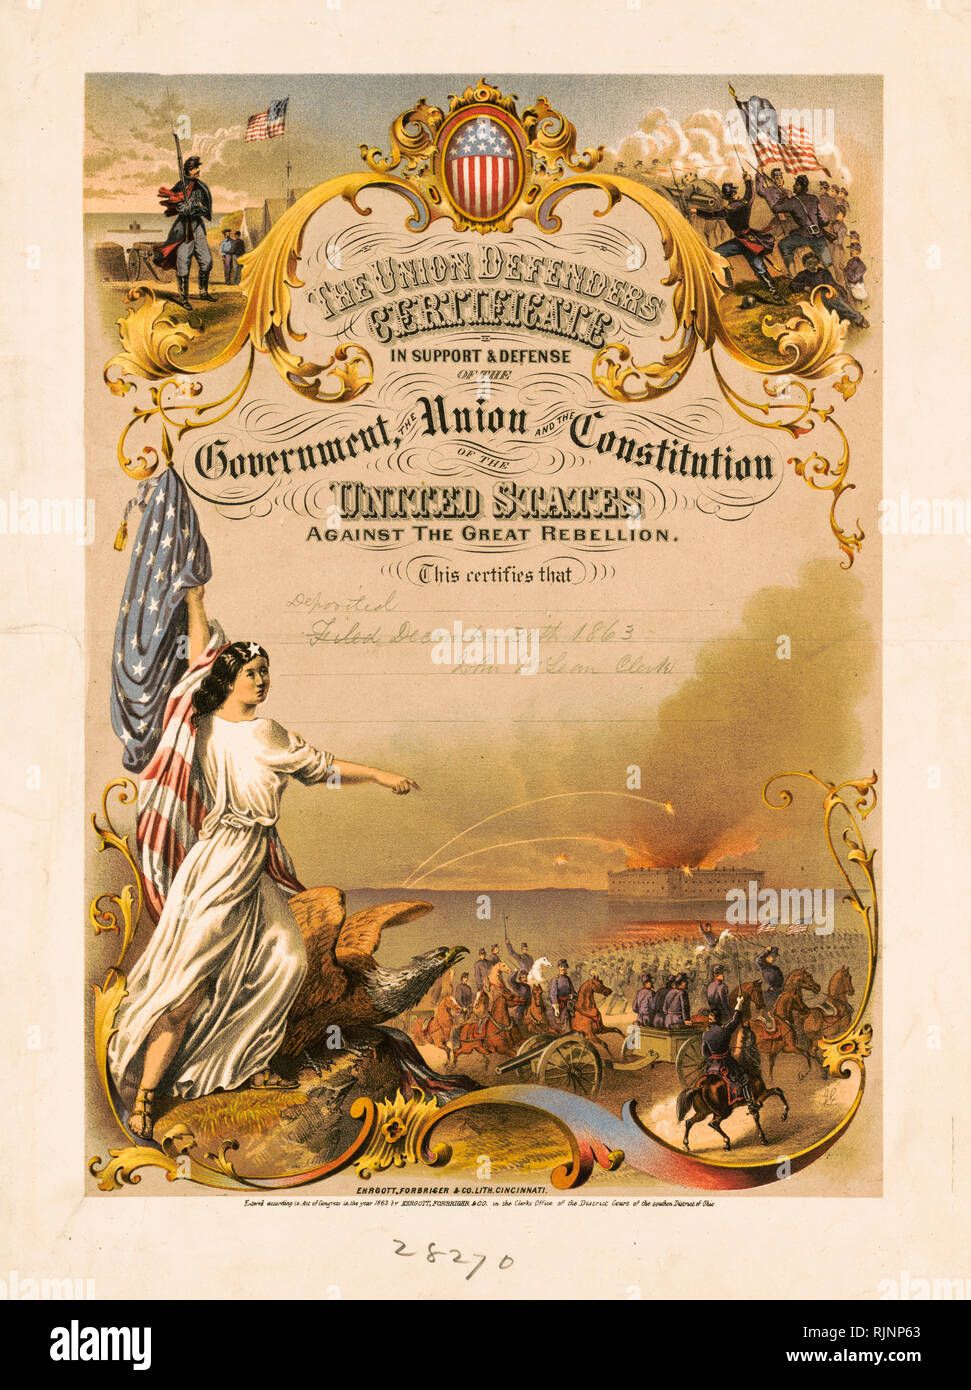 American Civil War art, Certificate of service, The Union Defenders Certificate, Max Rosenthal 1865, print Stock Photo